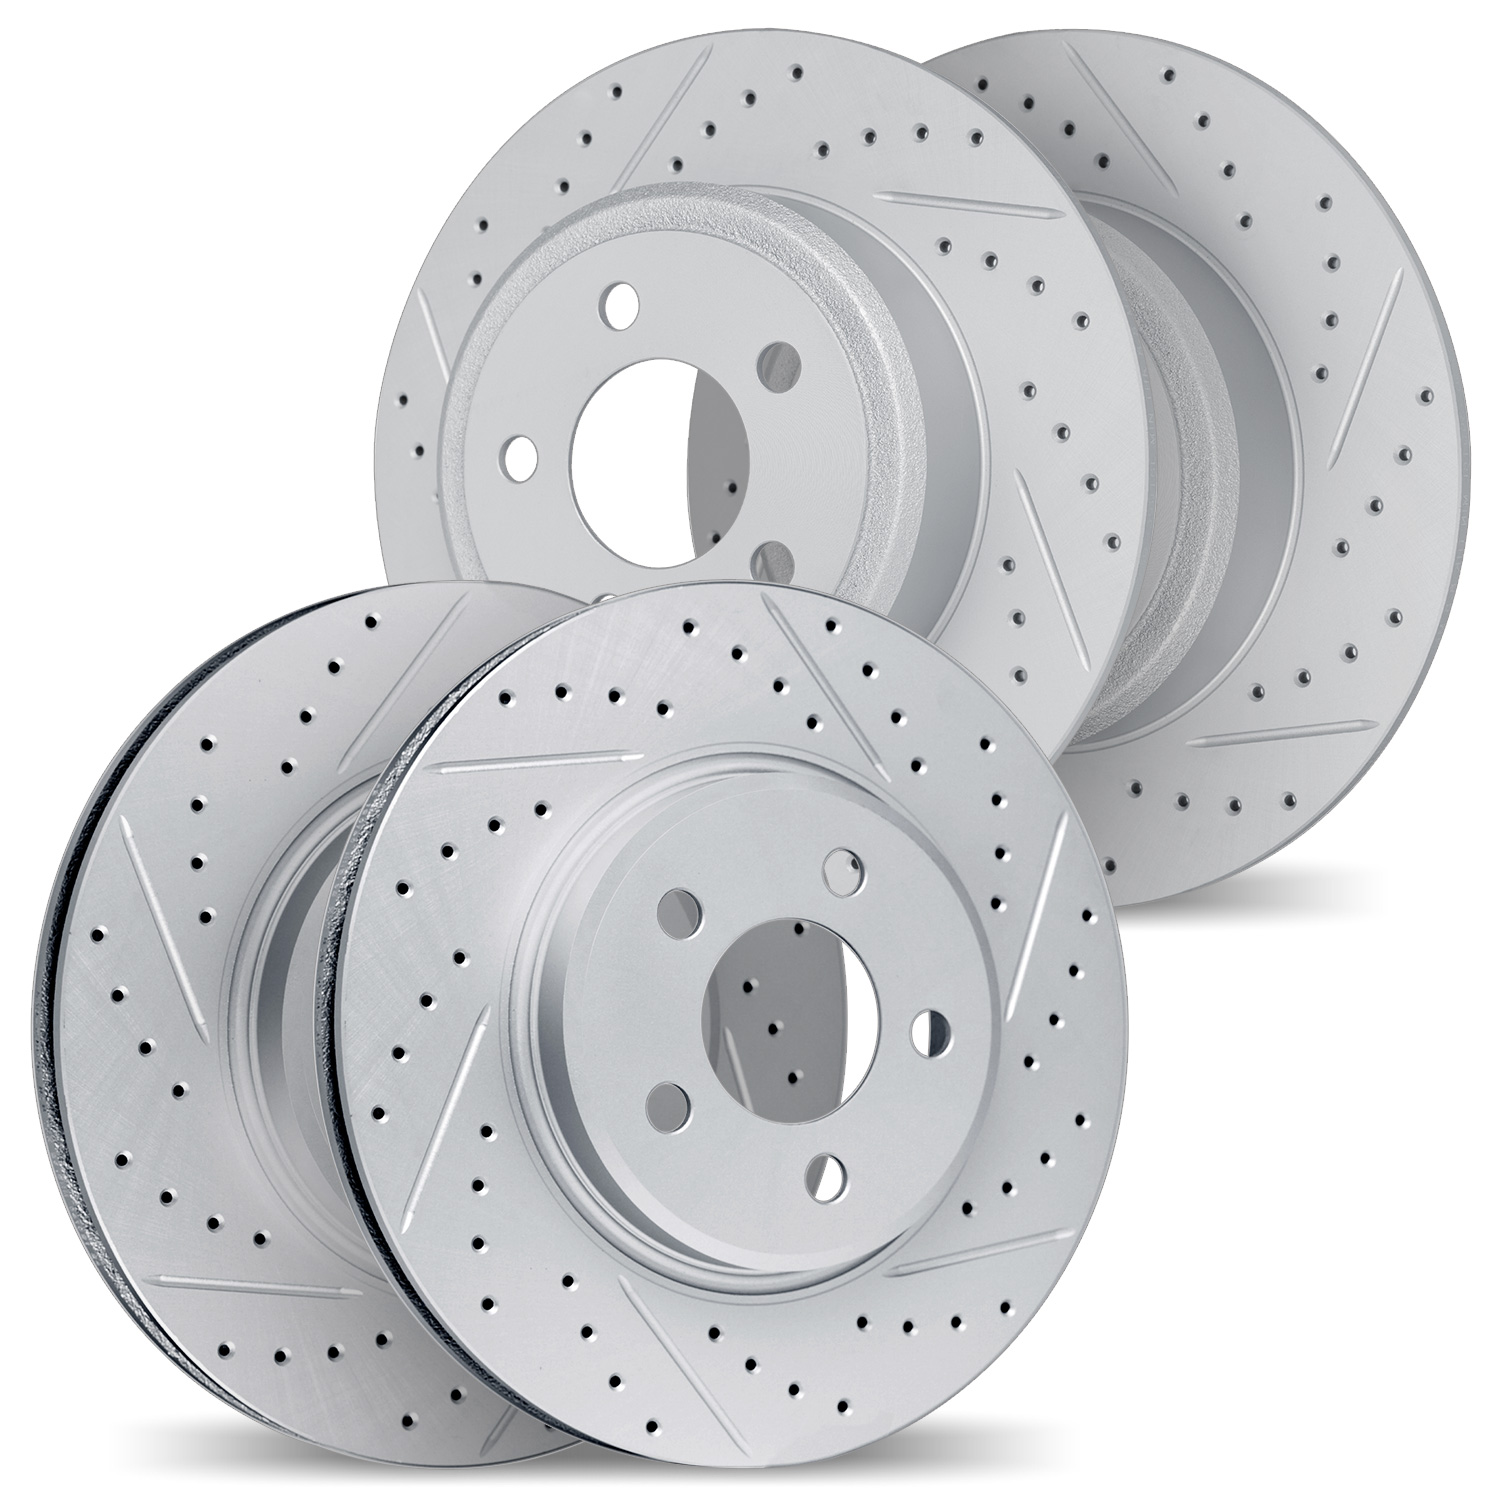 2004-74001 Geoperformance Drilled/Slotted Brake Rotors, 2005-2018 Audi/Volkswagen, Position: Front and Rear